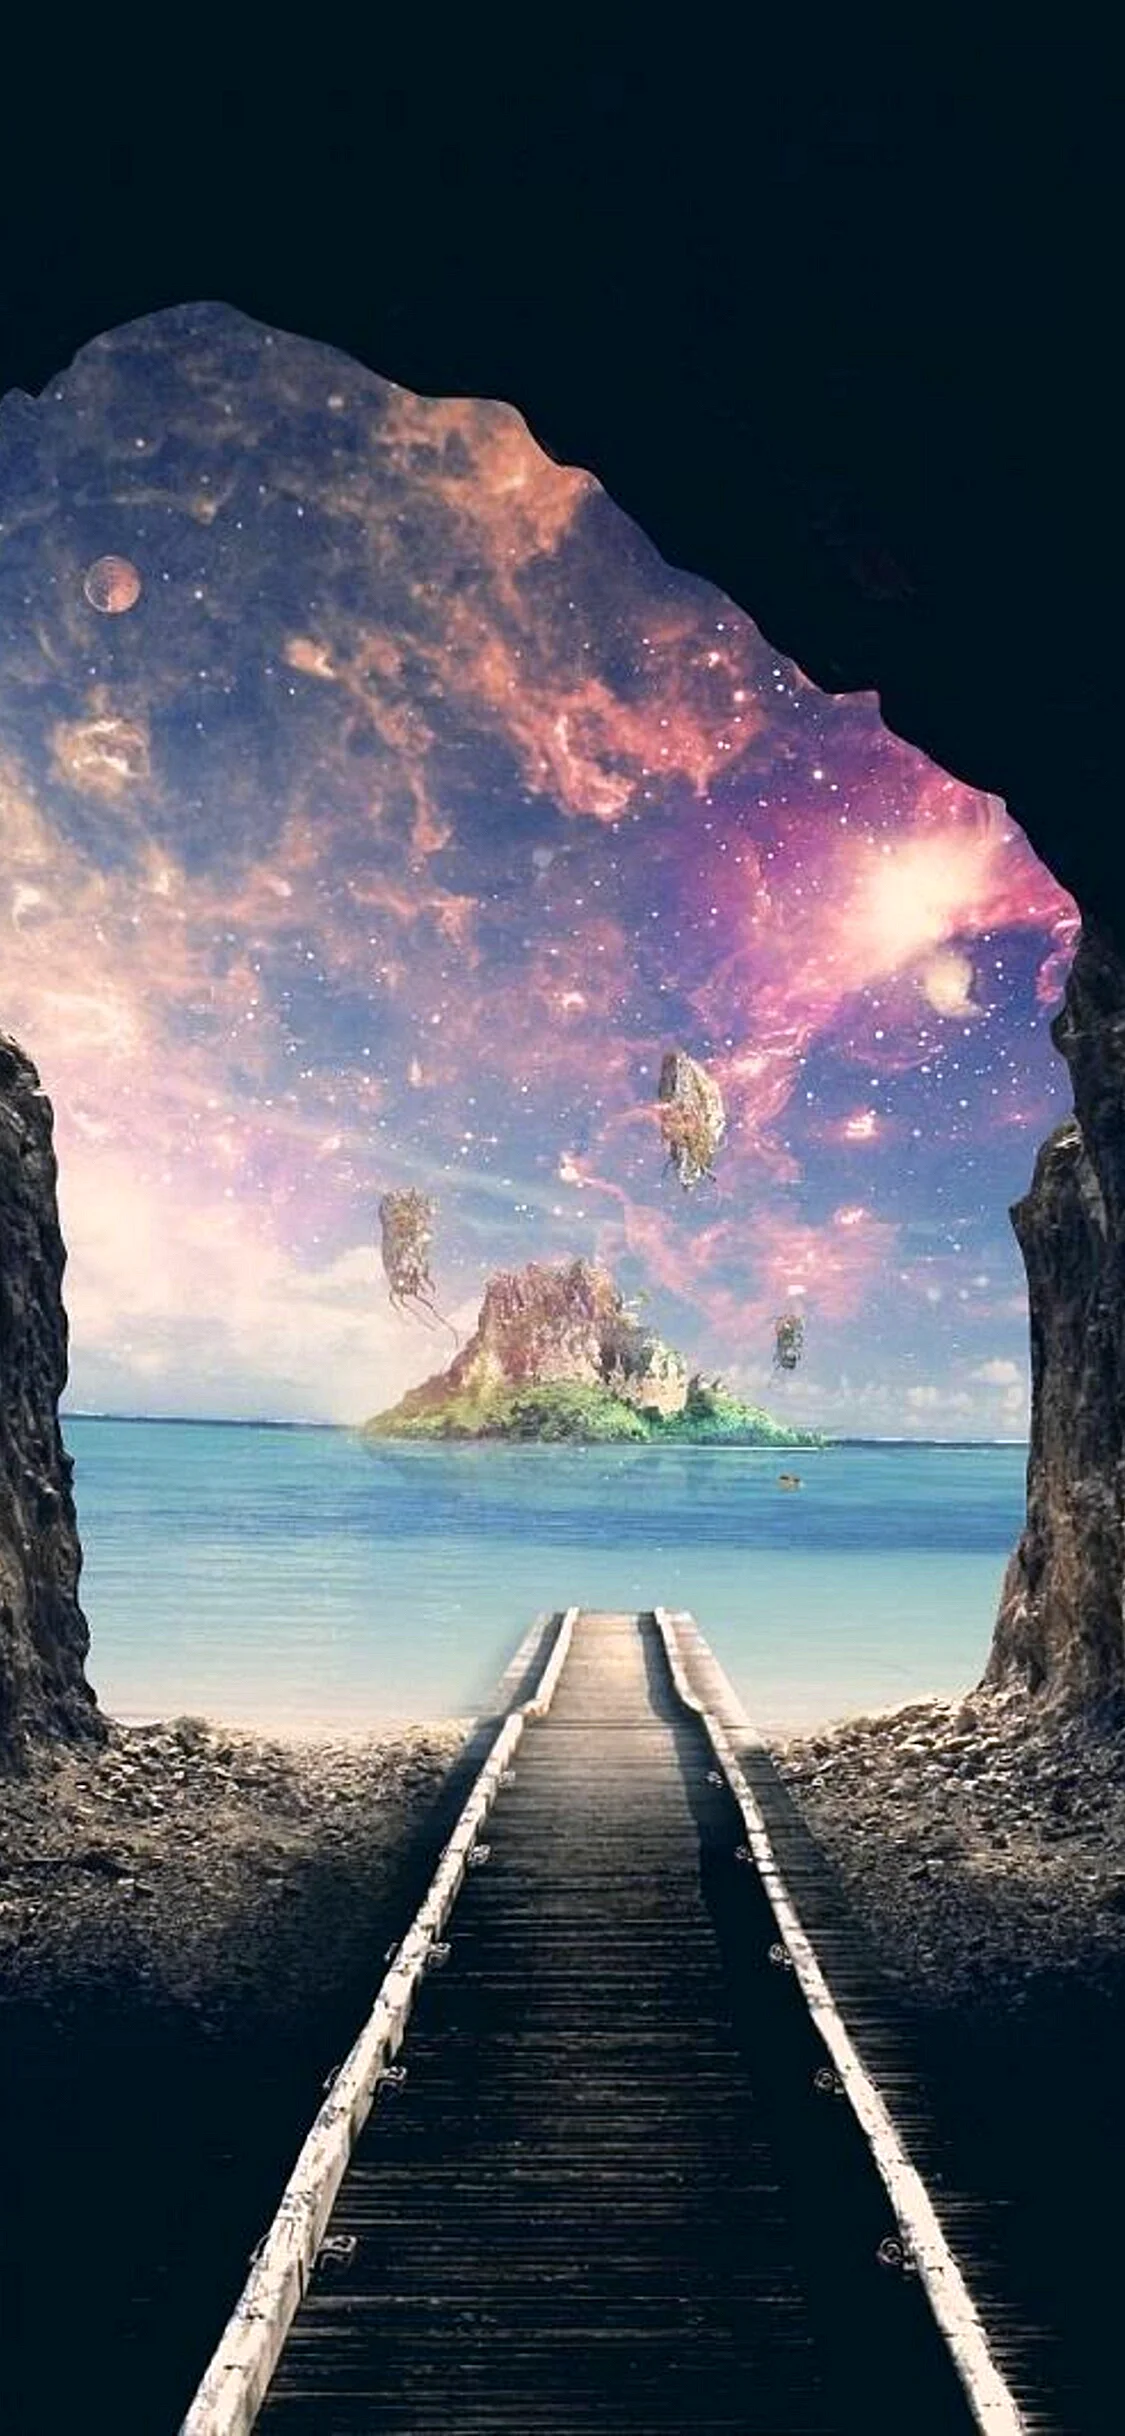 Take Me To Neverland Wallpaper for iPhone 11 Pro